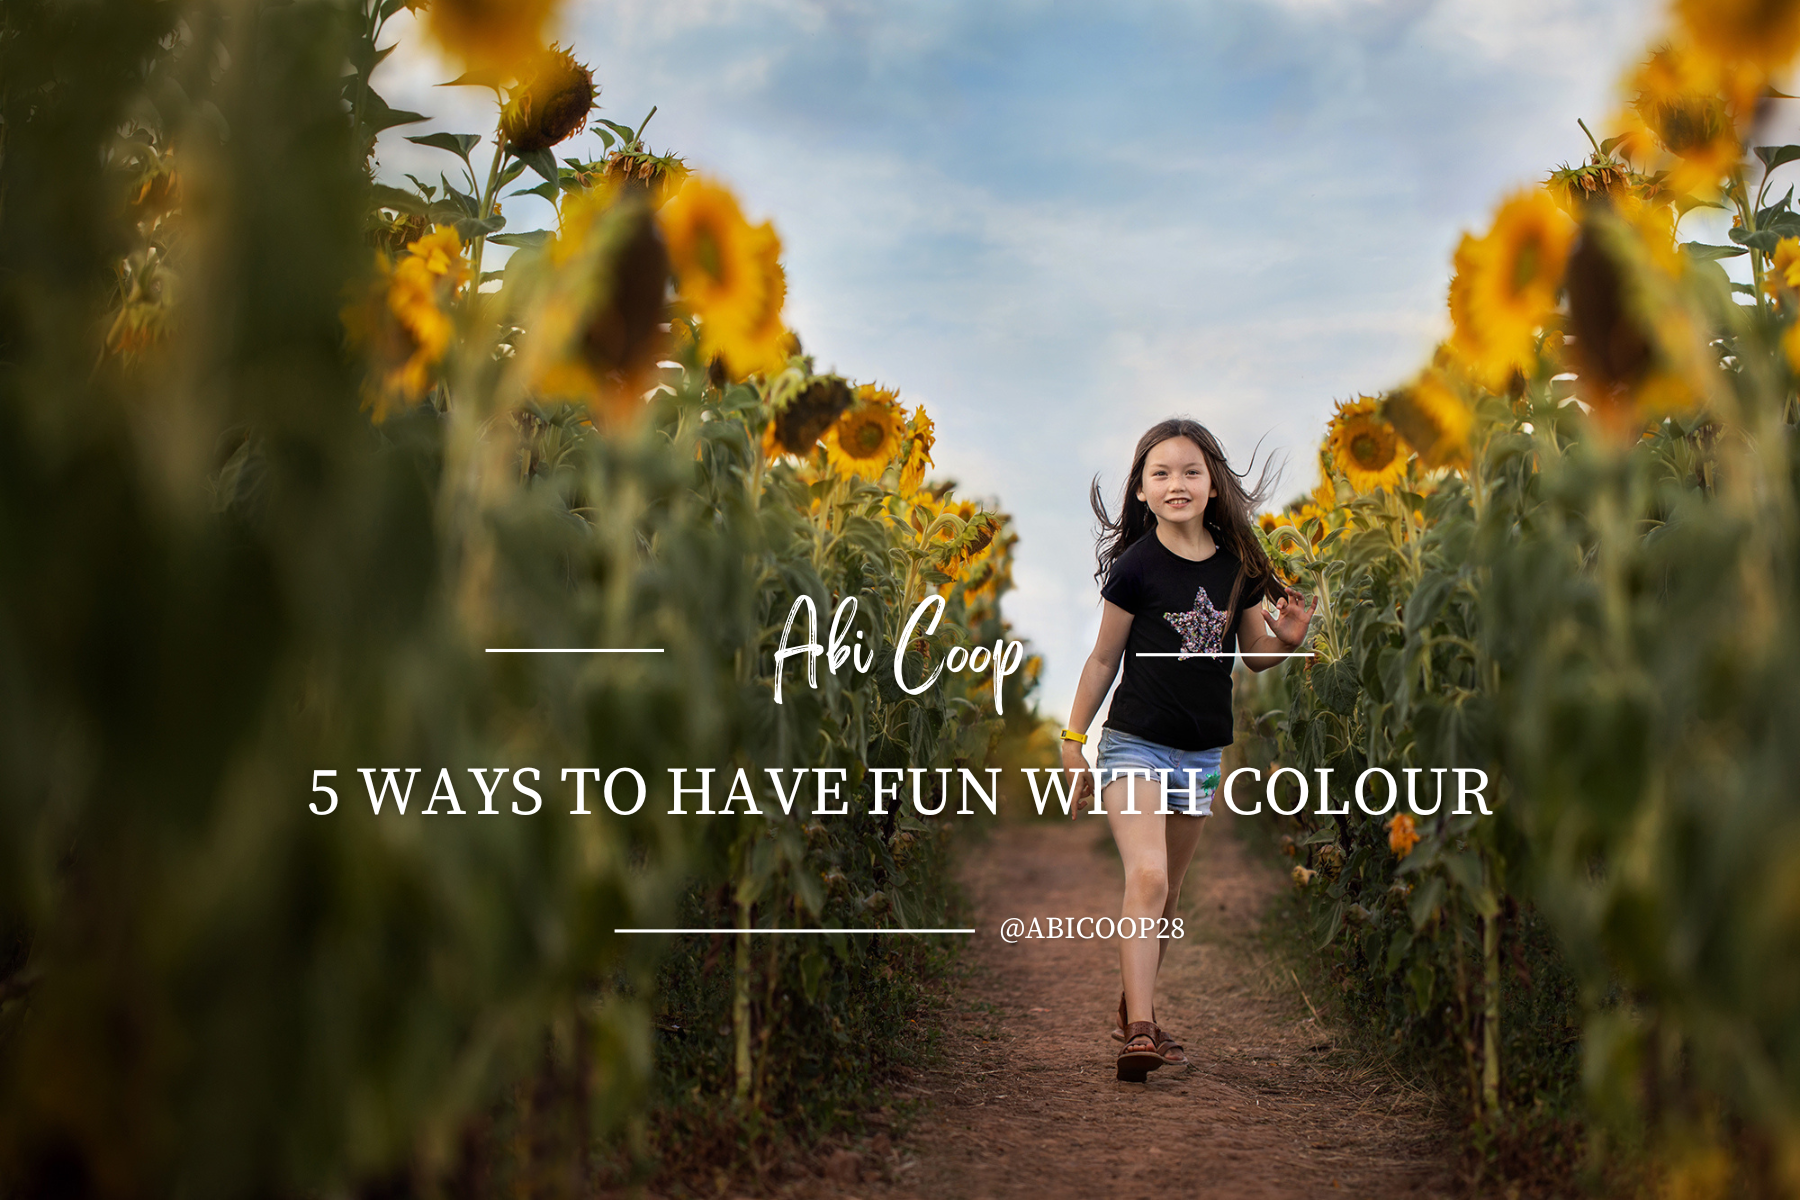 5 Ways to Have Fun with Colour